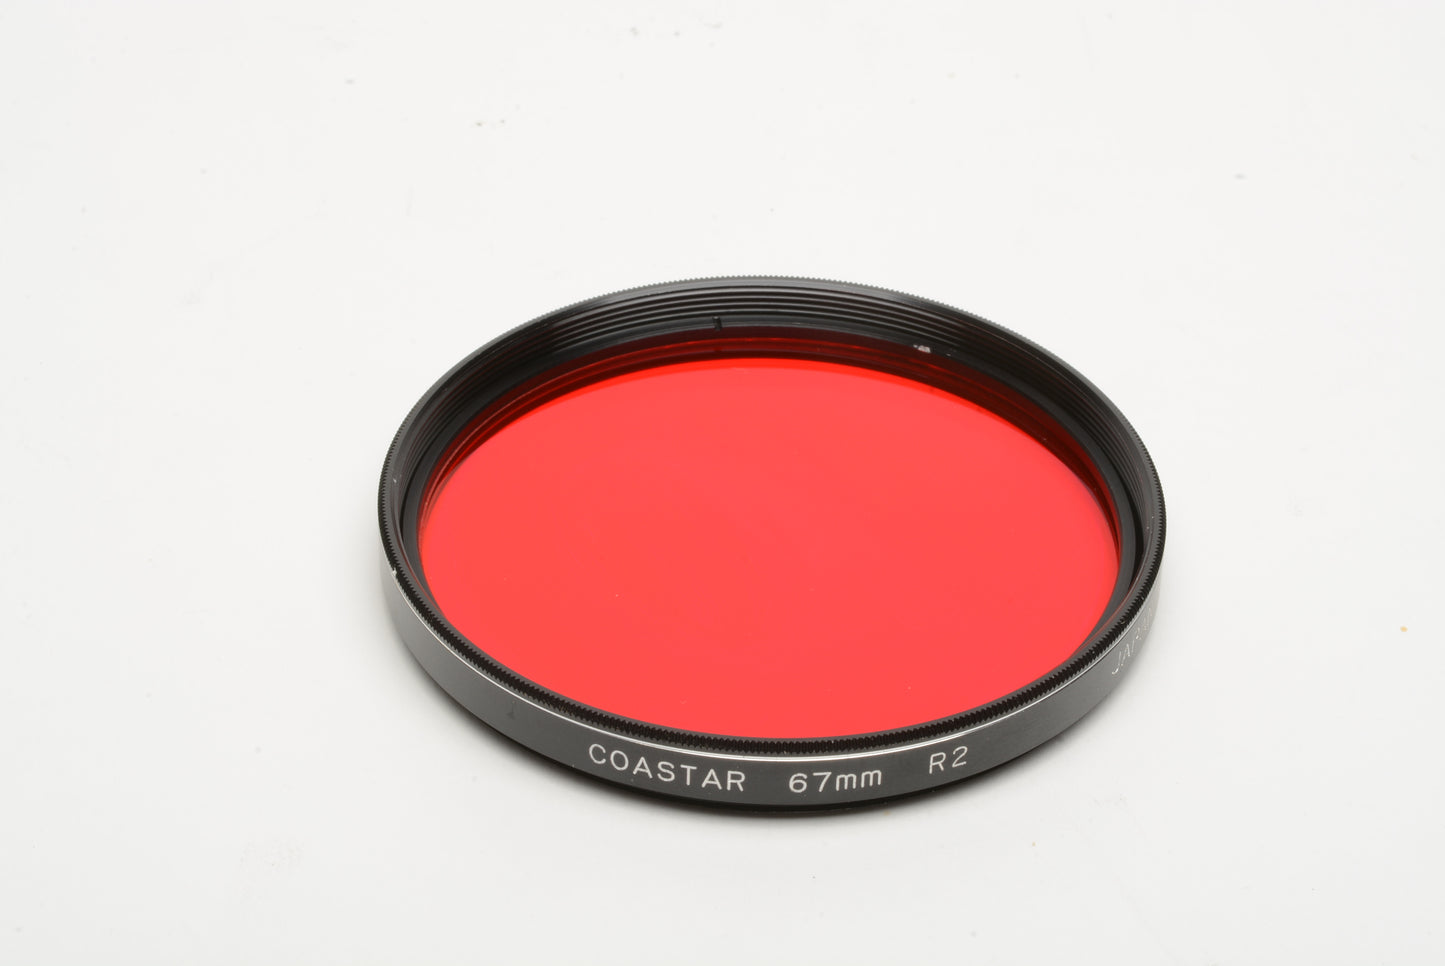 Set of 4 Coastar 67mm B&W Contrast filters (Yellow, Orange, Green, Red), Clean!